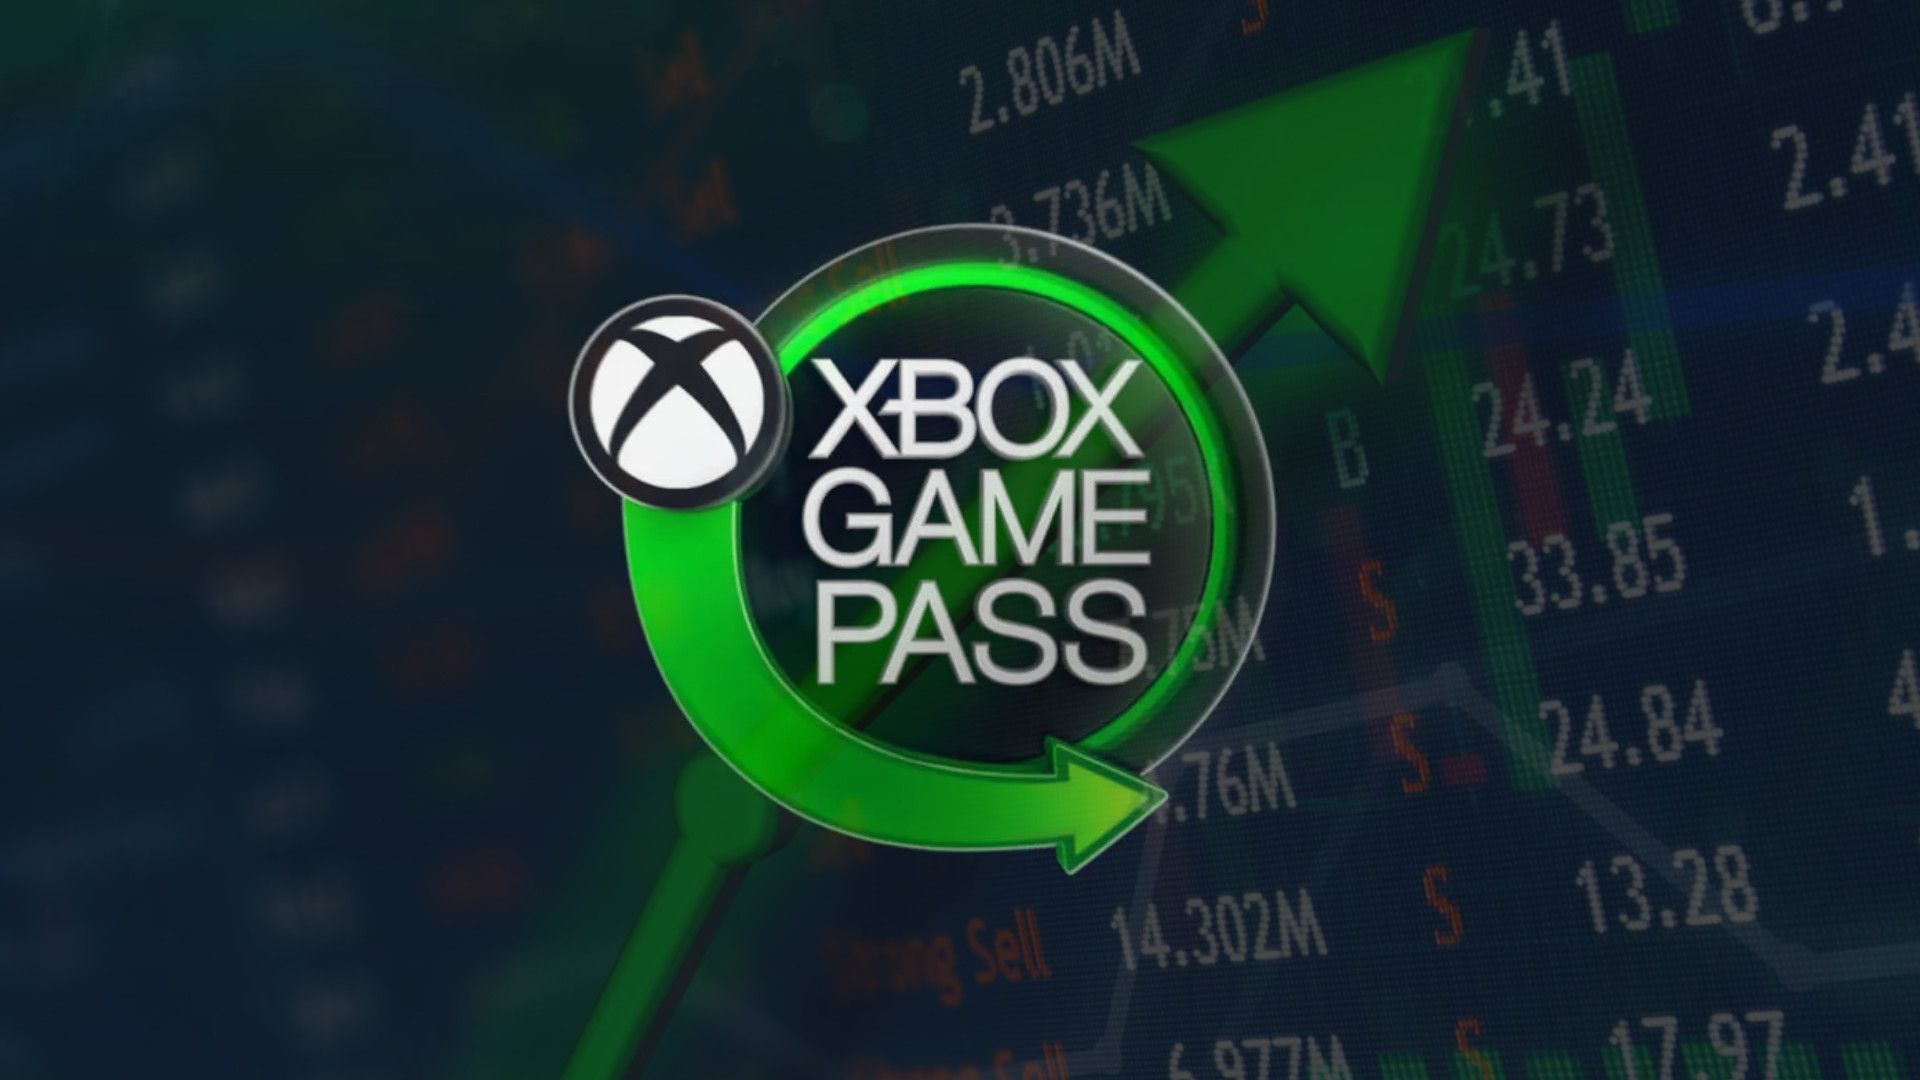 Phil Spencer Vows There Won't Be Xbox Game Pass Exclusive Games